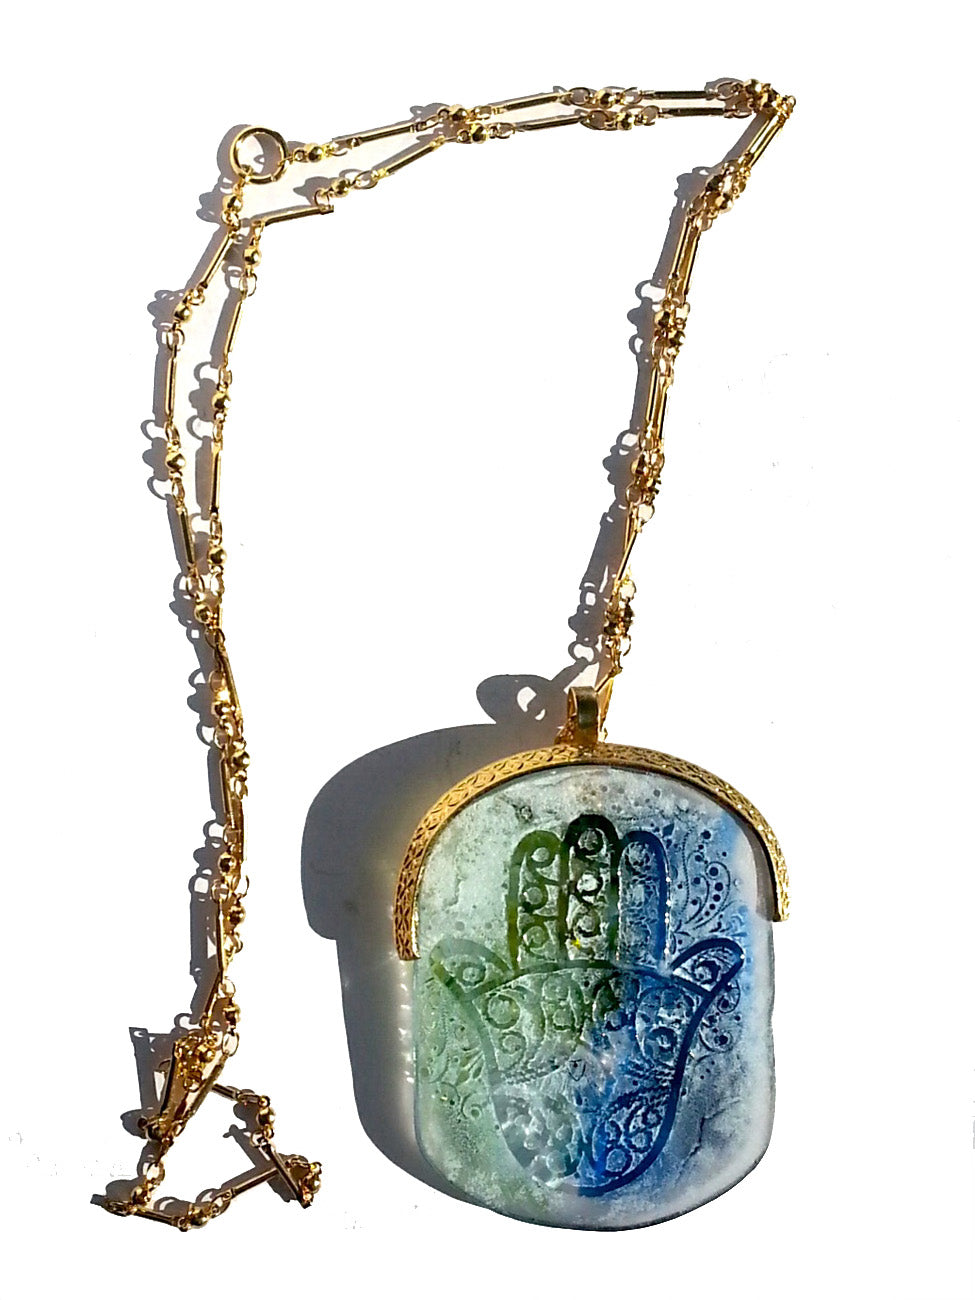 Necklace Hand Cast French Glass  Pendant Hamsa Blue Green